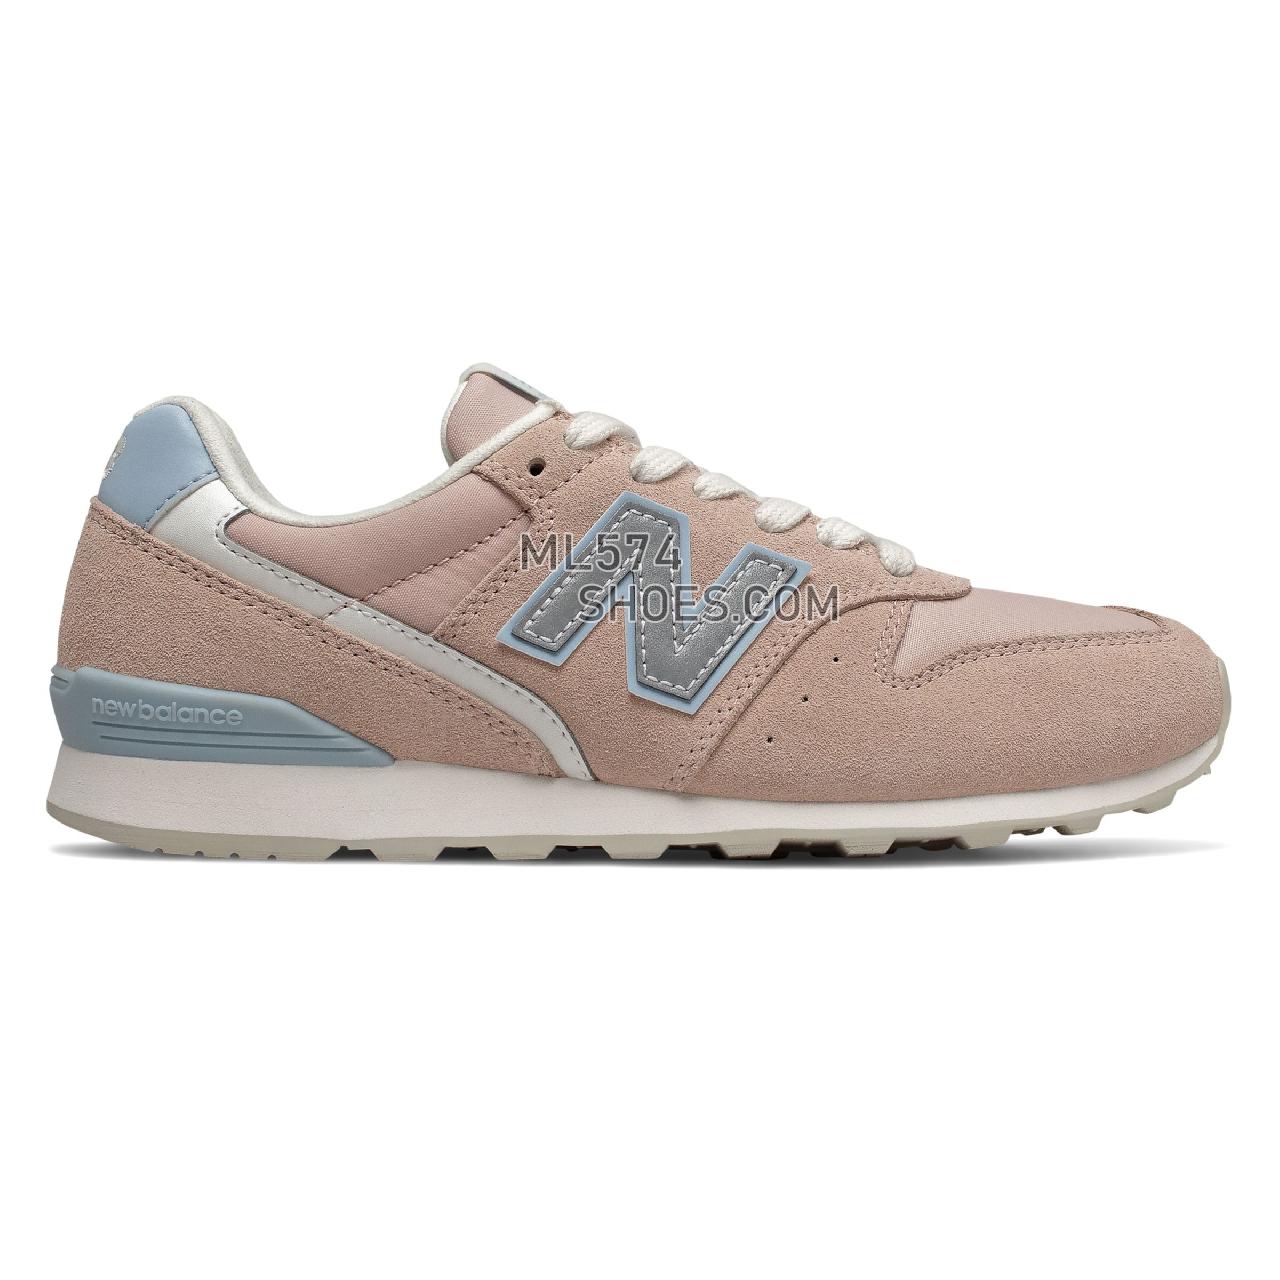 New Balance 996 - Women's Classic Sneakers - White Oak with Light Lapis Blue - WL996AD